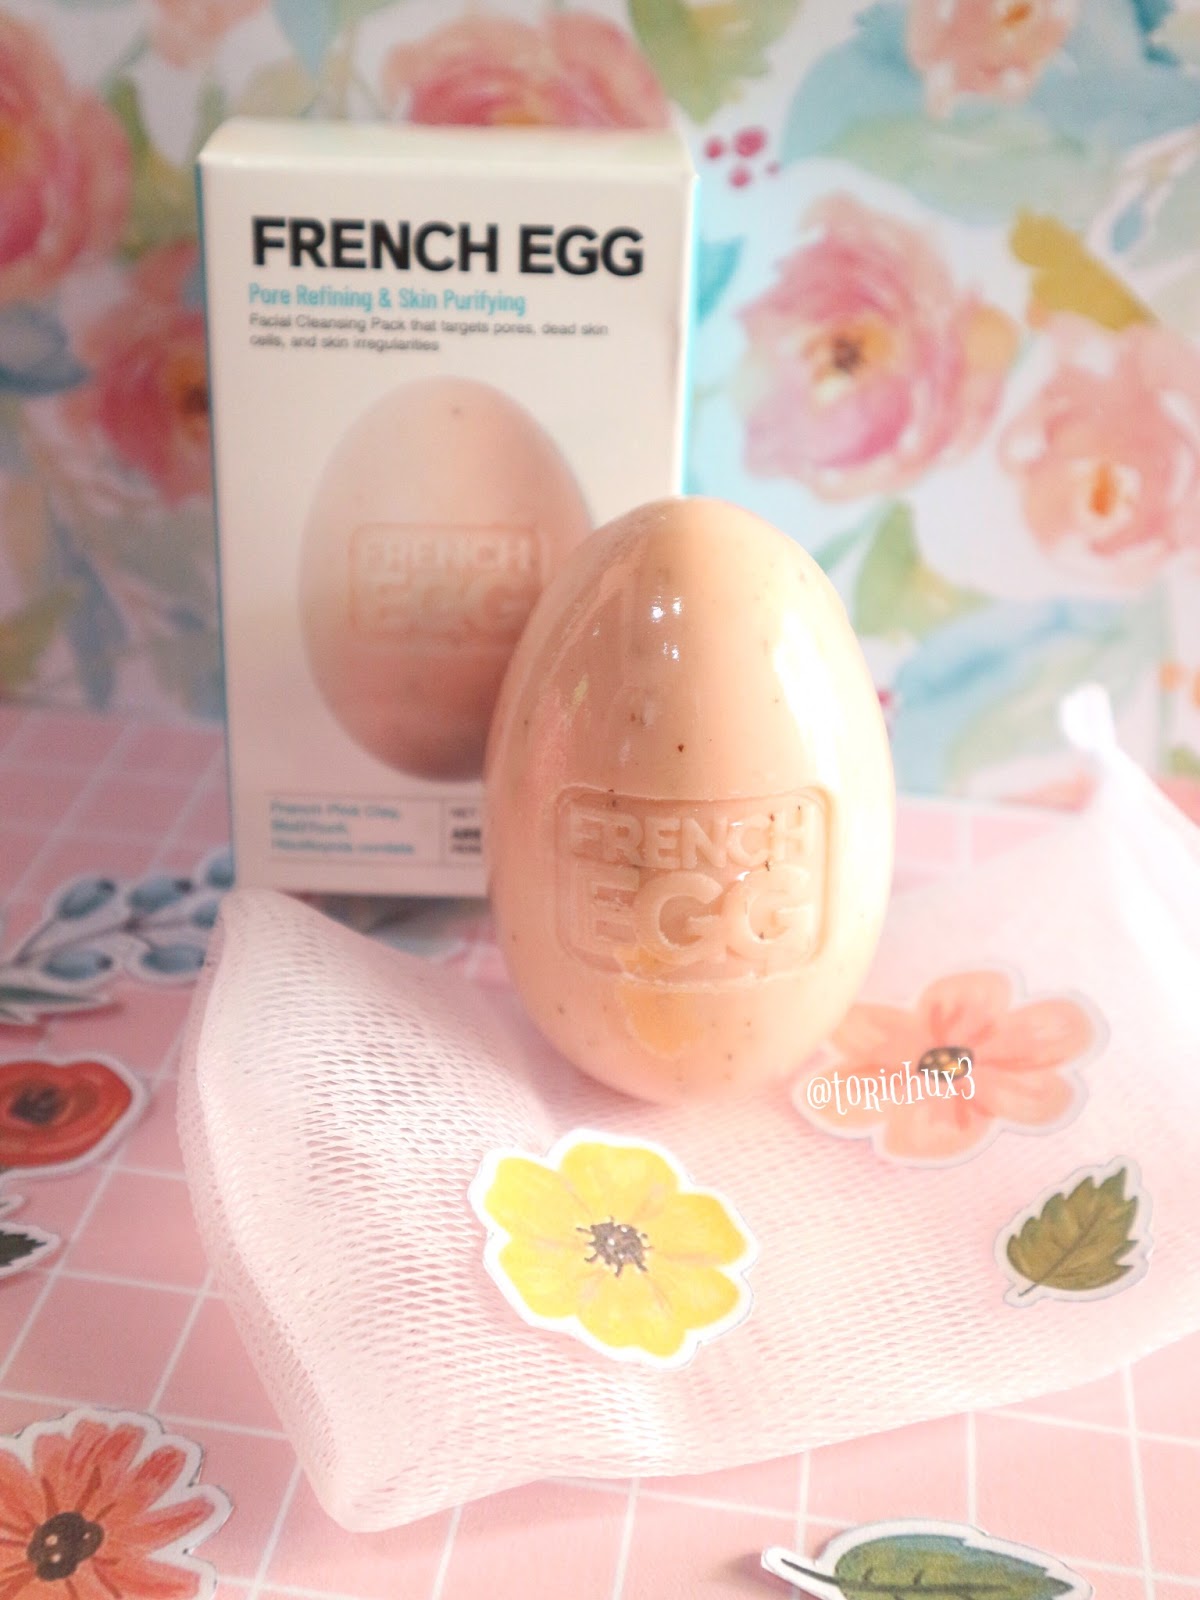 Tori Chu: REVIEW : ARENCIA FRENCH EGG FACIAL CLEANSING PACK 